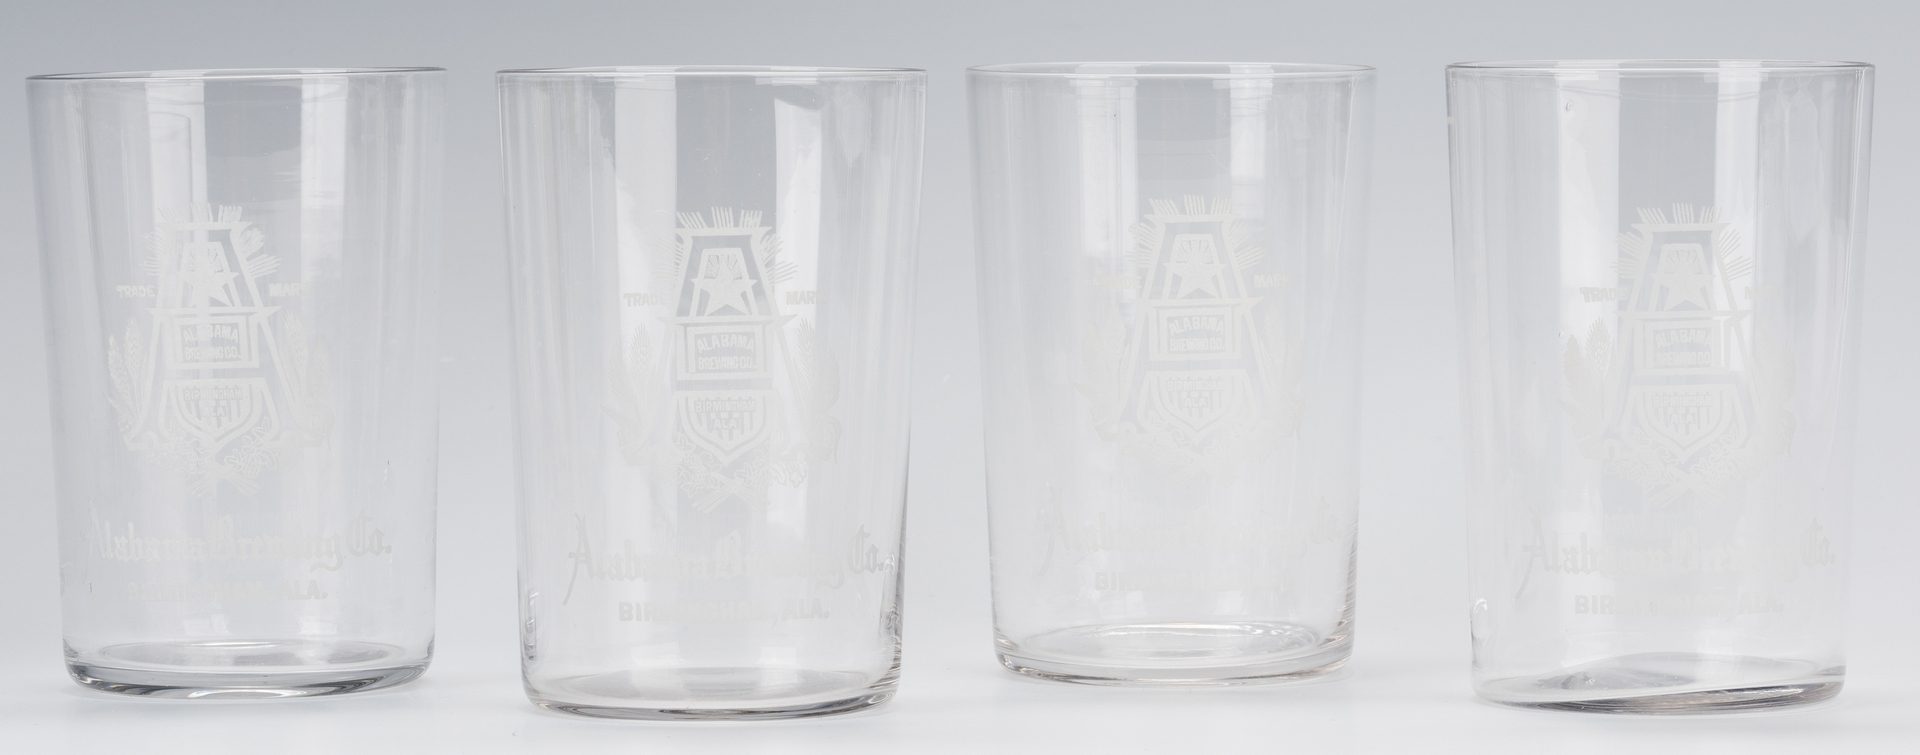 Lot 804: Alabama Brewing Co. Advertising Tray & 4 Glasses